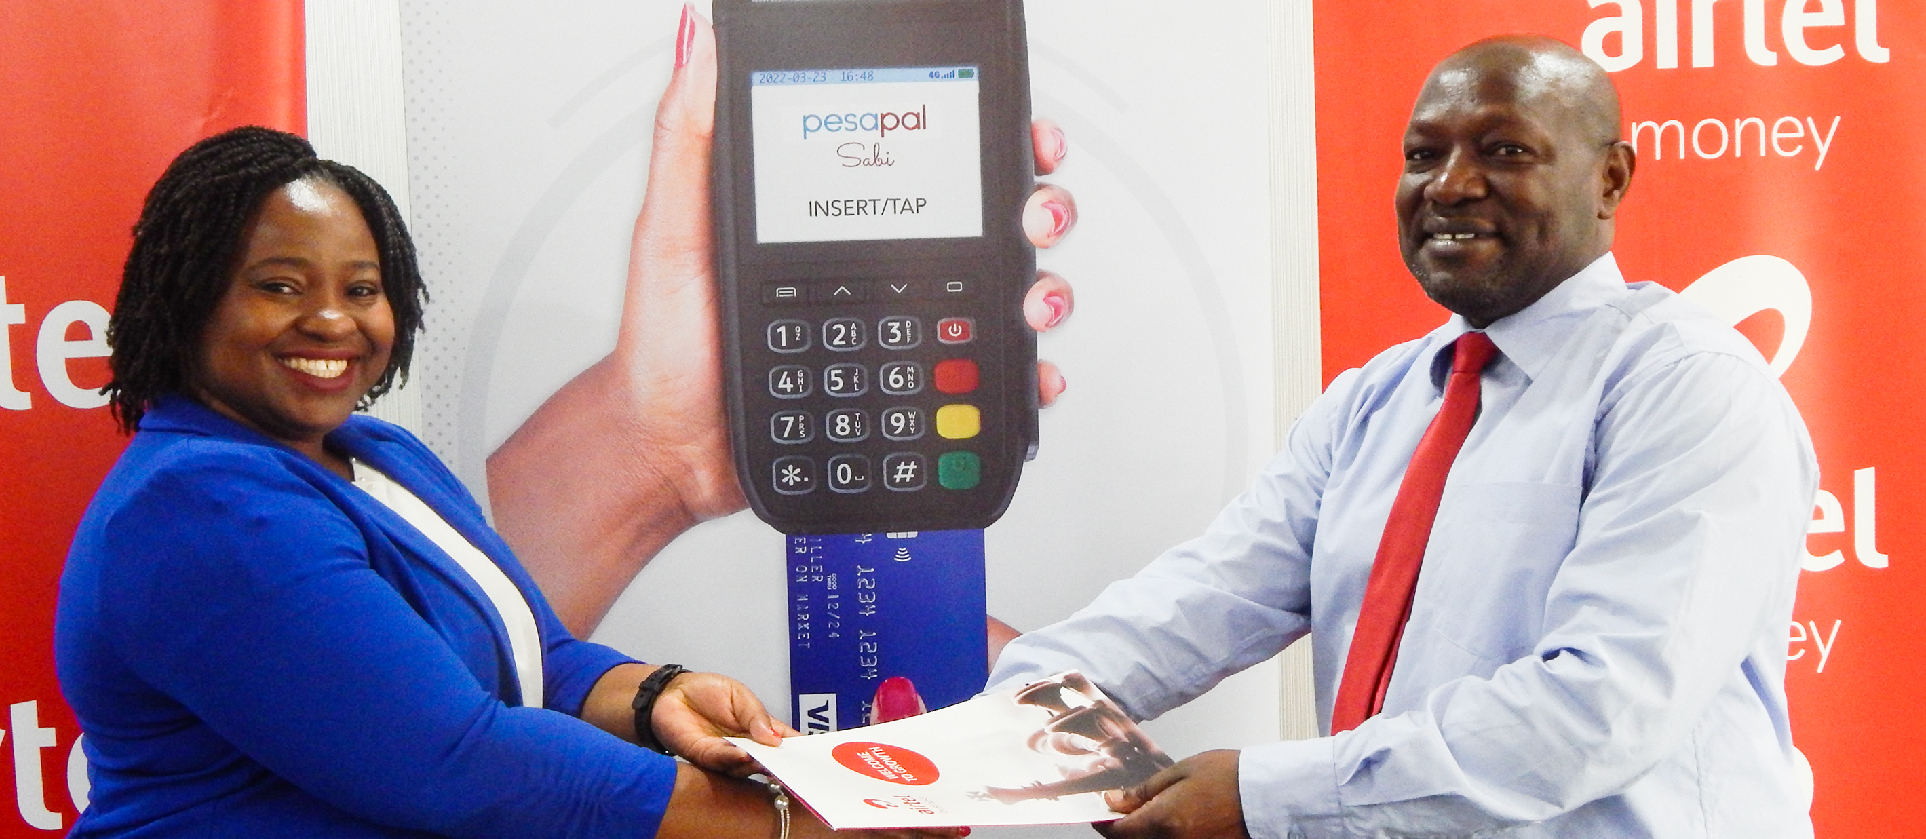 Accept online and in-store payments with Airtel Money on Pesapal